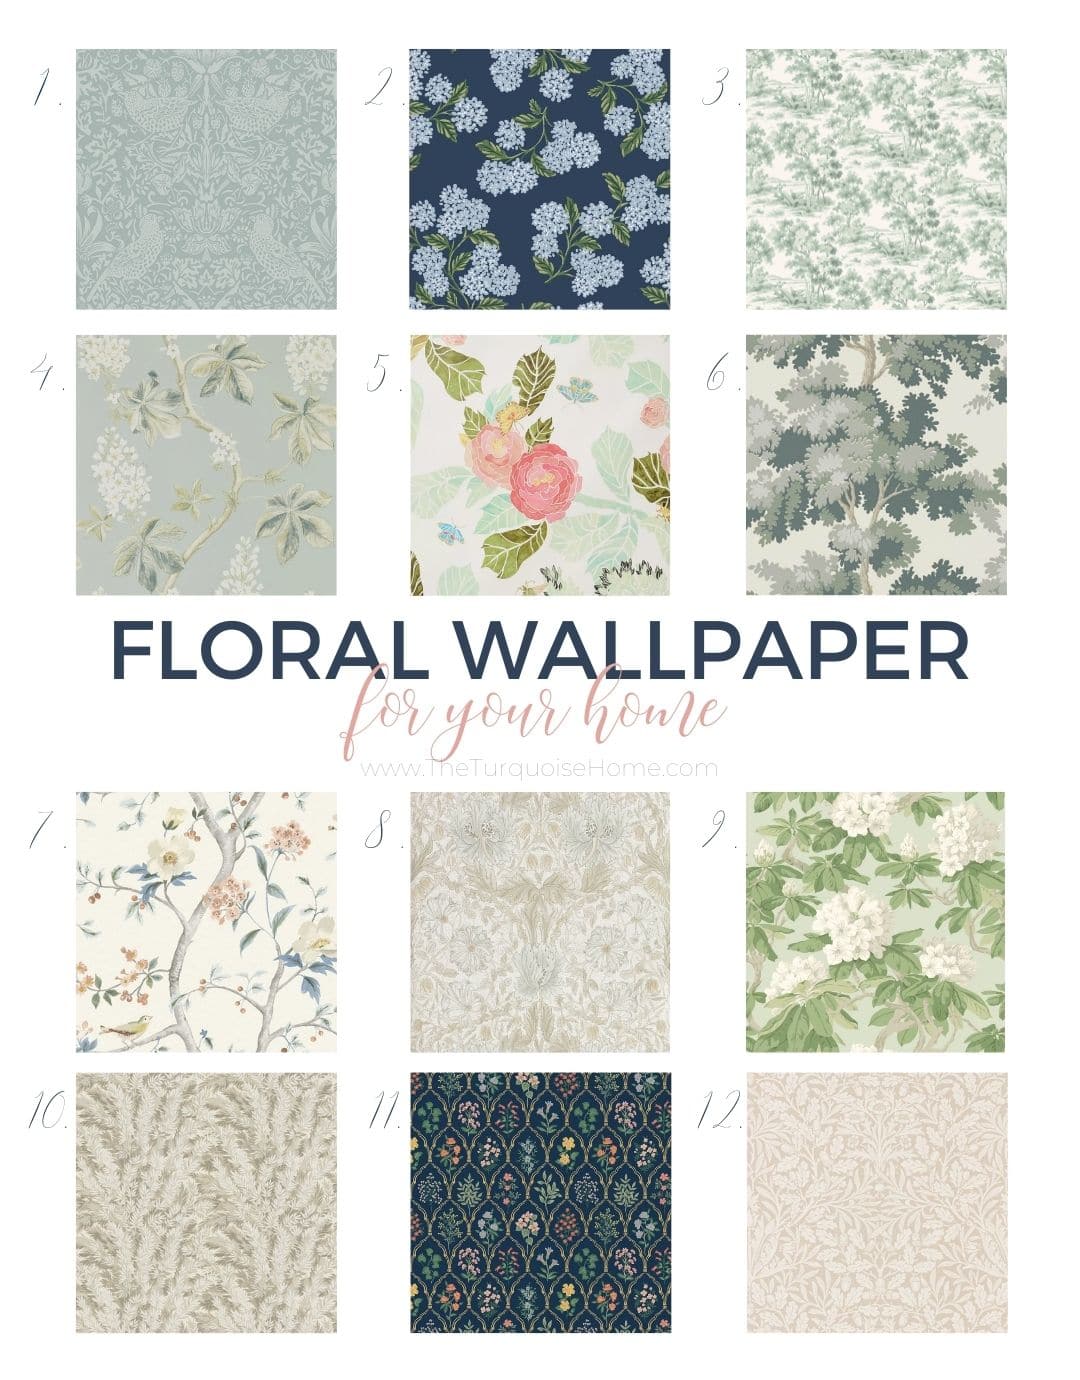 How to Select Wallpaper {Decorating 101} - The Turquoise Home